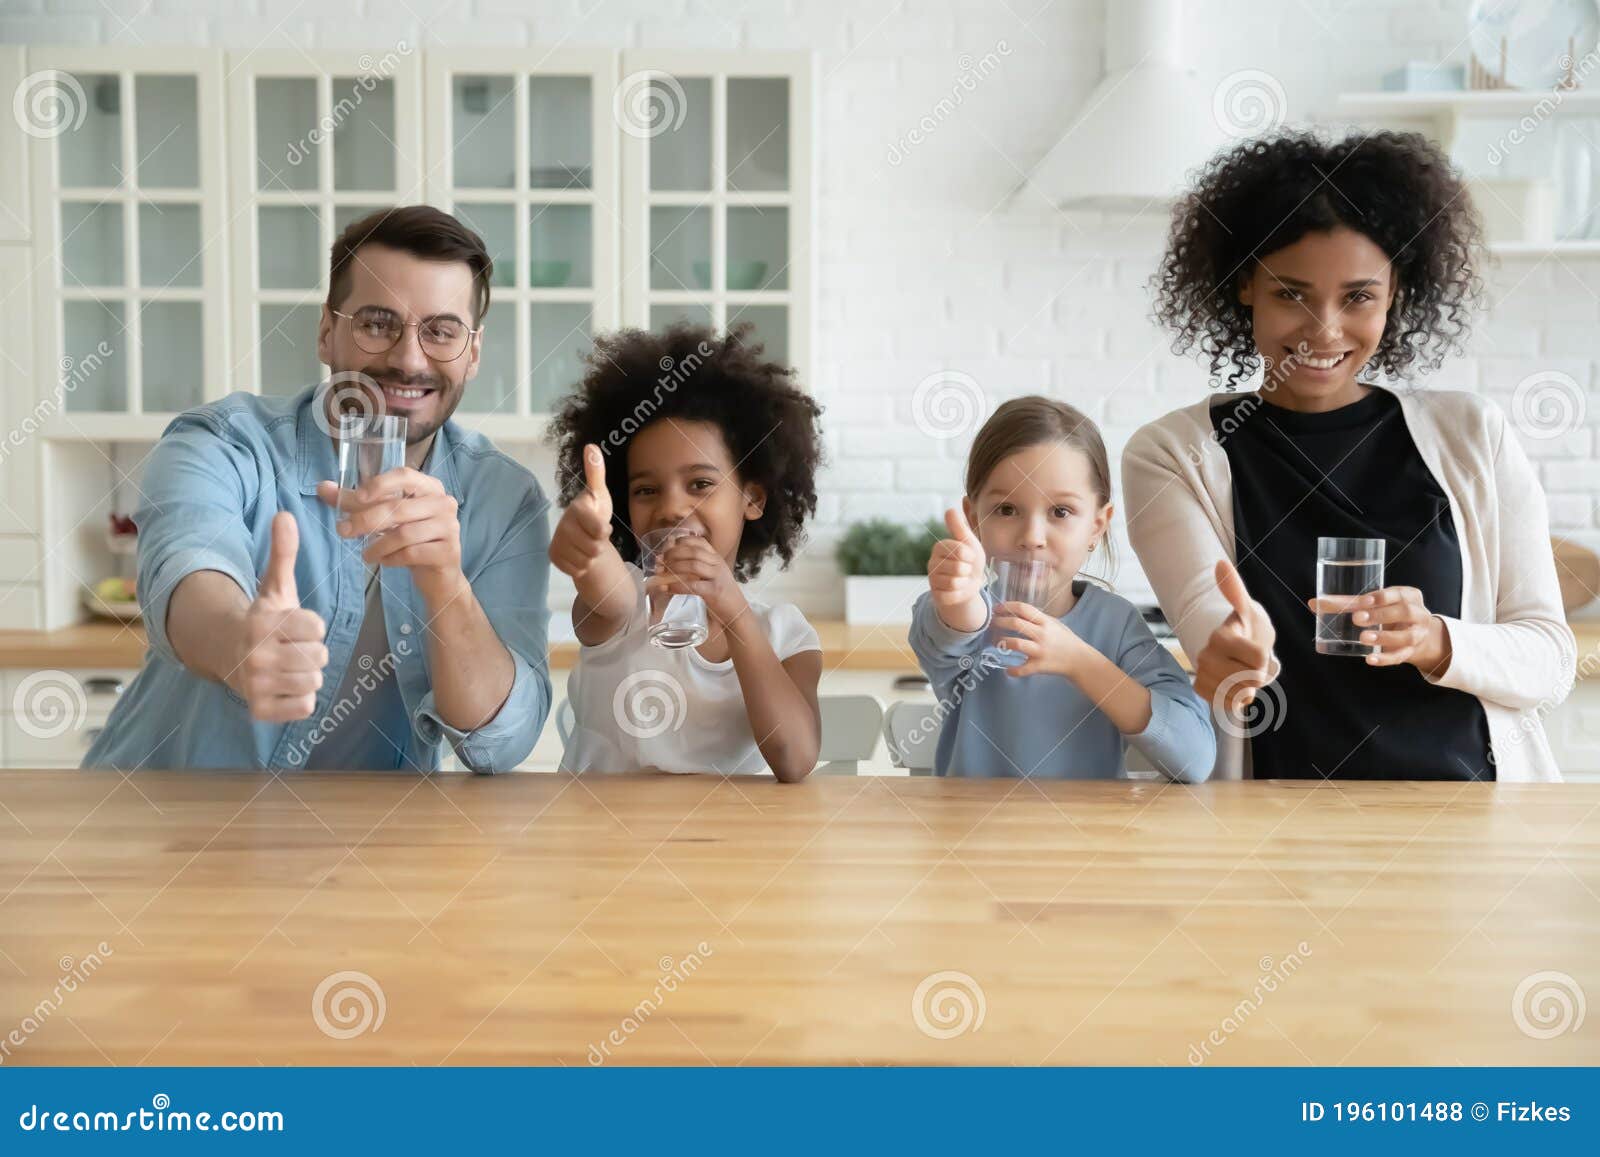 happy healthy mixed race family recommending drinking water.